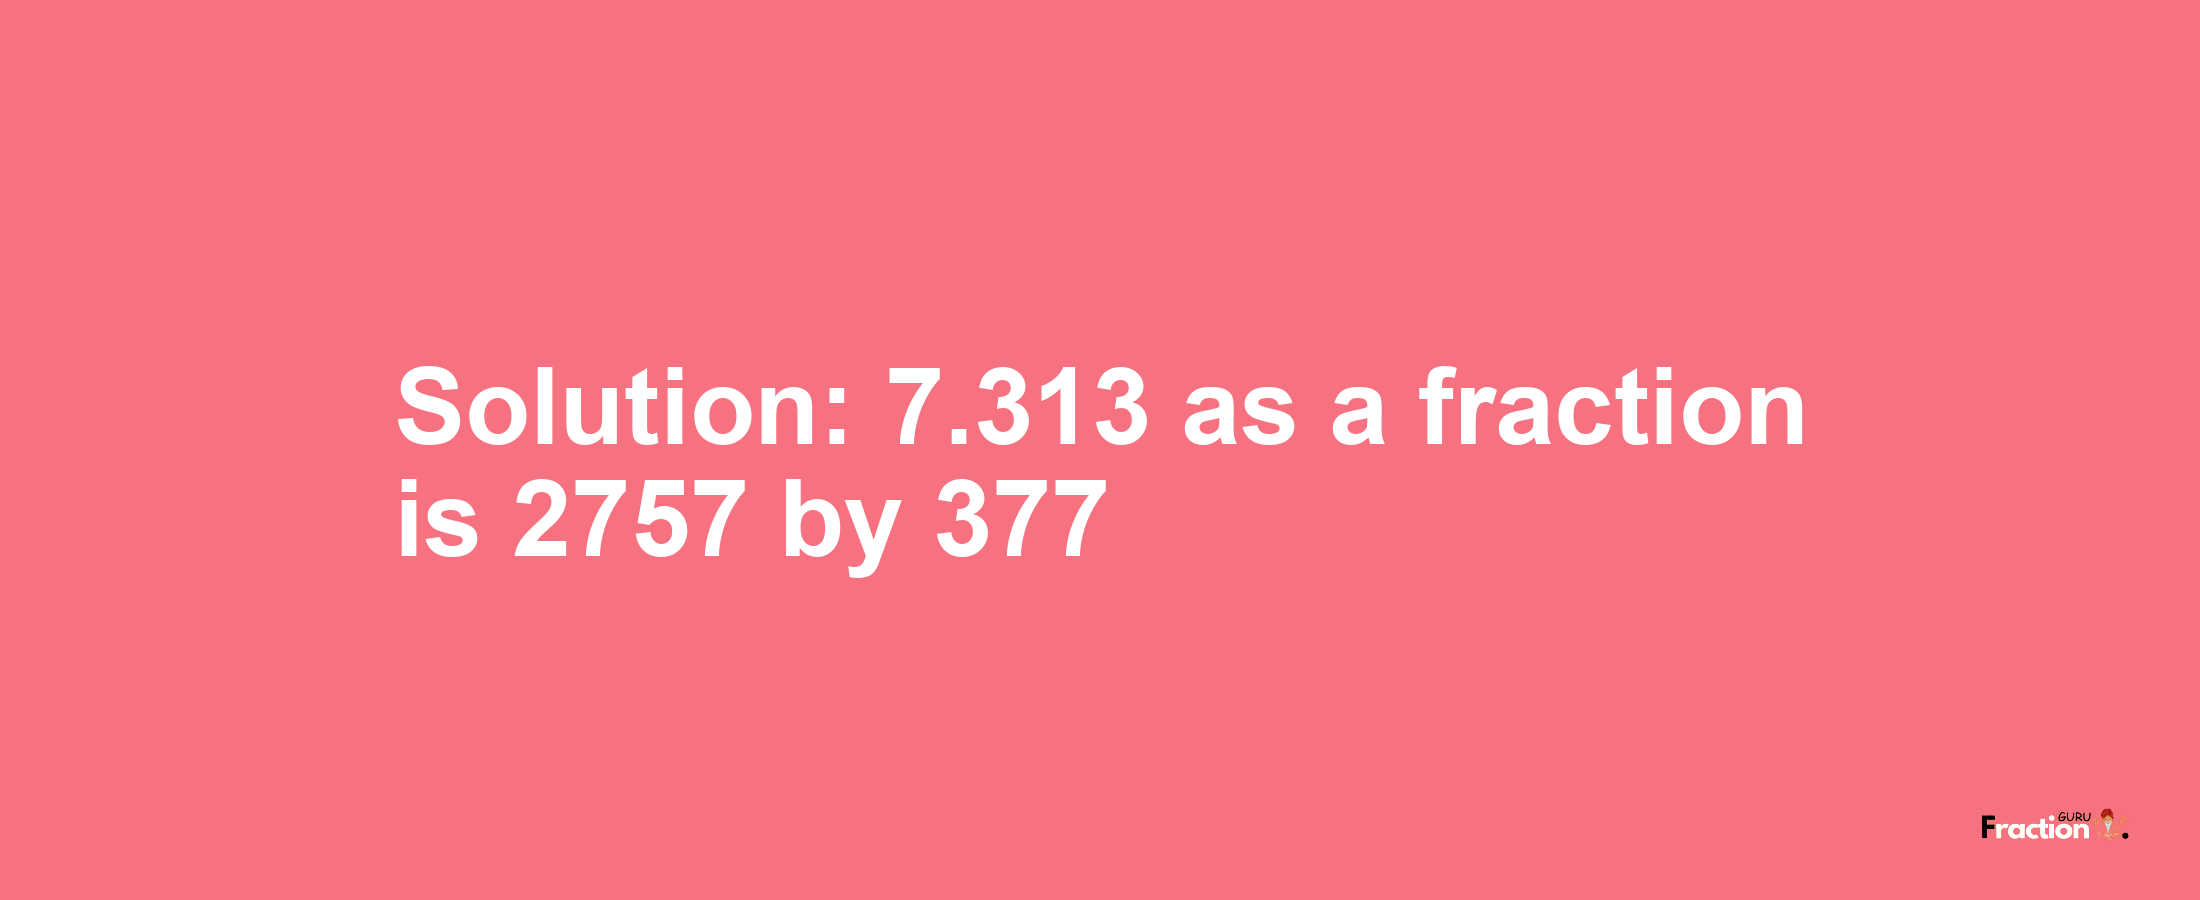 Solution:7.313 as a fraction is 2757/377